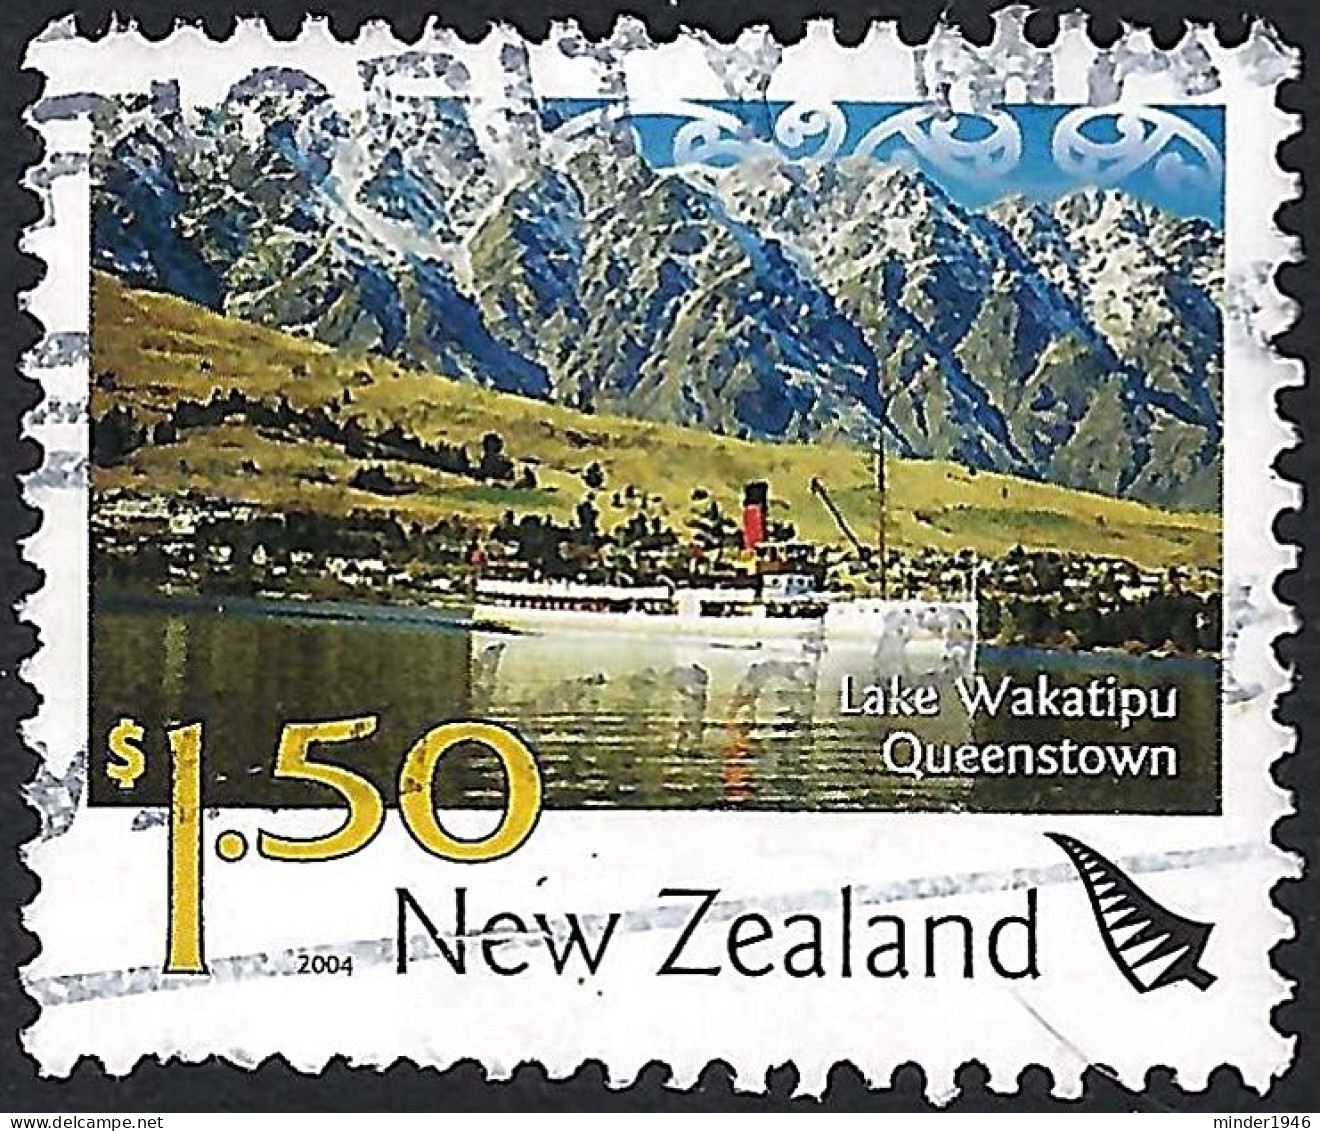 NEW ZEALAND 2004 QEII $1.50 Multicoloured, Tourist Attractions-Lake Watatipu Queenstown Used - Used Stamps